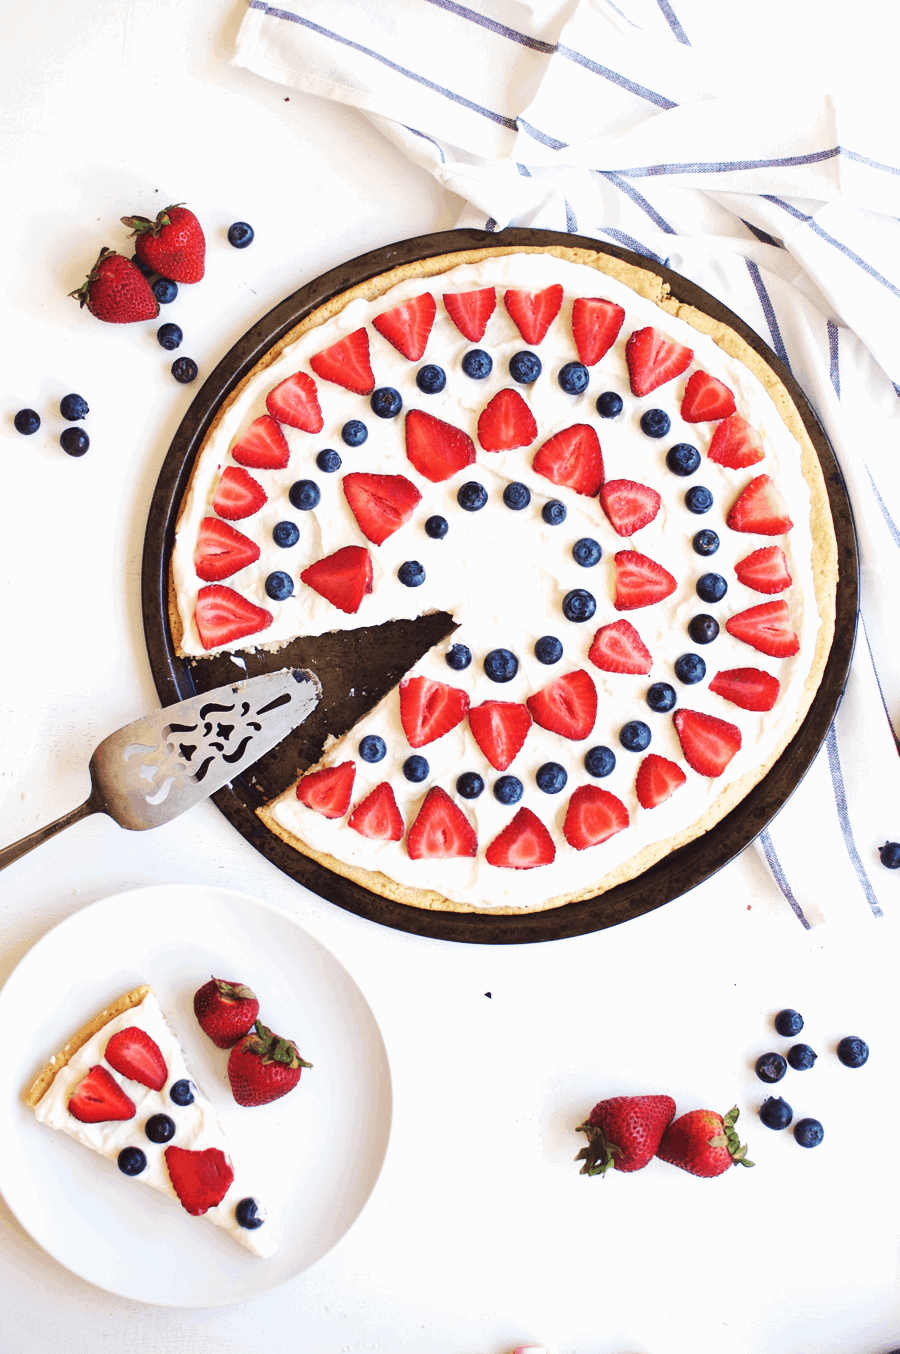 This 4th of July berry dessert pizza needs to be at the top of your list of festive foods to make! The combination of juicy, sweet berries and cream cheese icing spread on a sugar cookie crust is absolutely delicious. You’ll definitely be going back for seconds, maybe even thirds! || The Butter Half #easydessert #fruitpizza #summerrecipes #thebutterhalf